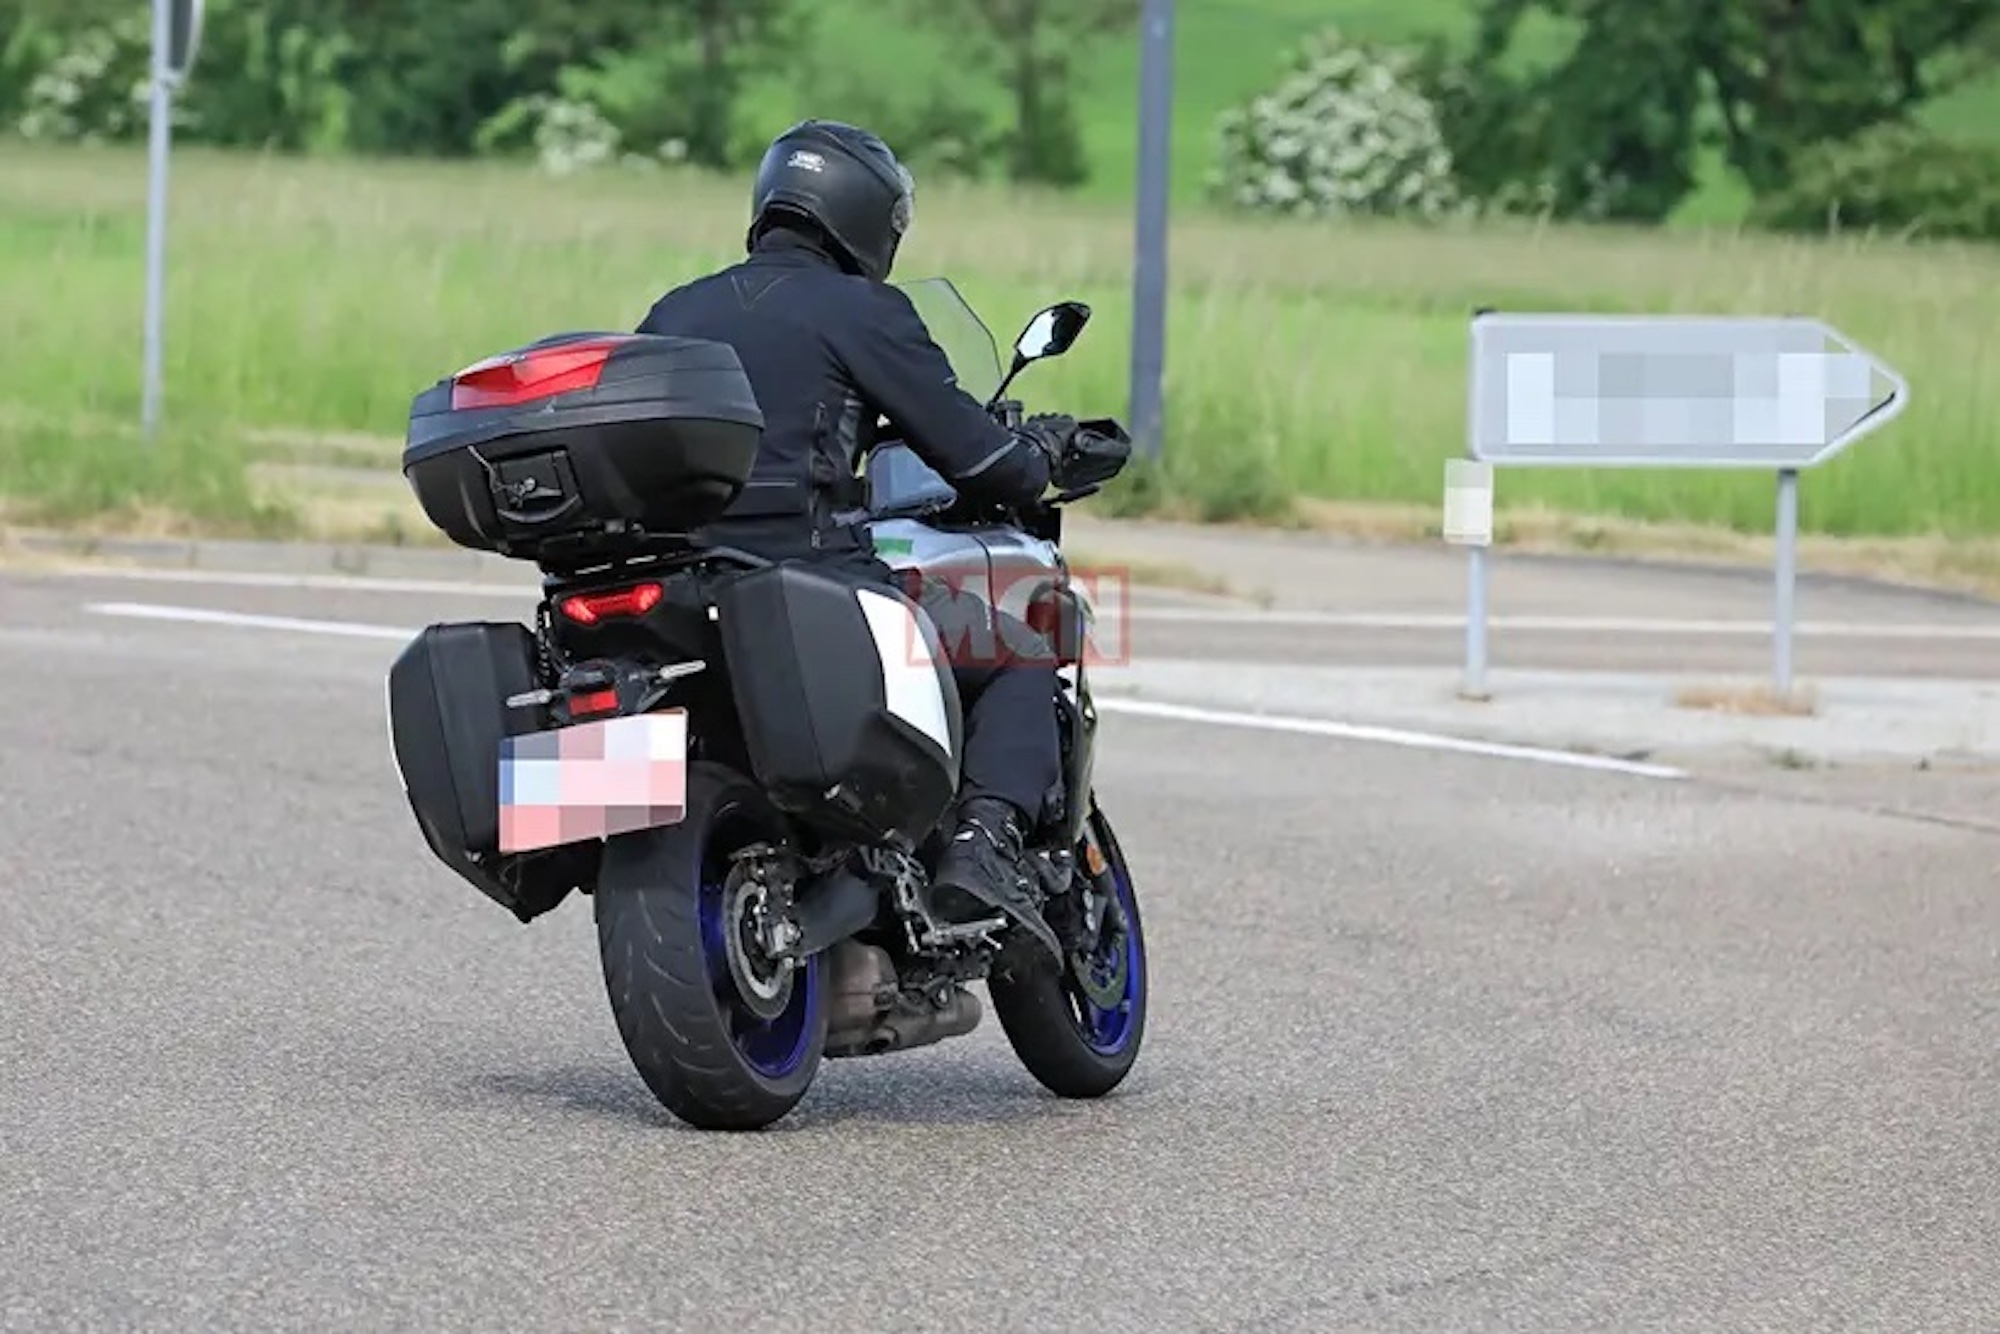 Spy shots showing a refresh for the Yamaha Tracer 9's electronics. Media sourced from MCN, with all rights reserved.